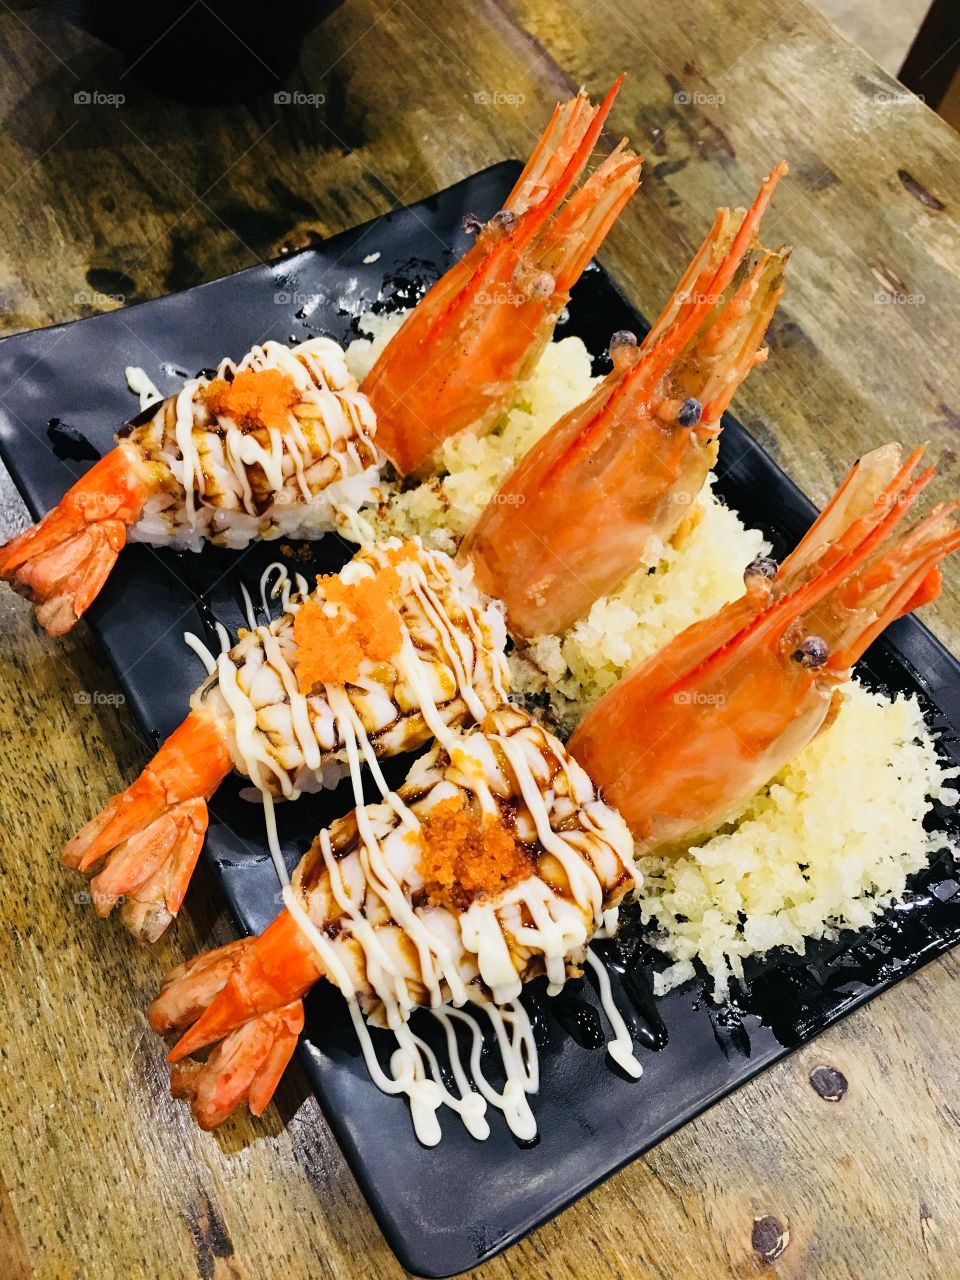 Sushi river prawn with crispy bread with mayonnaise source